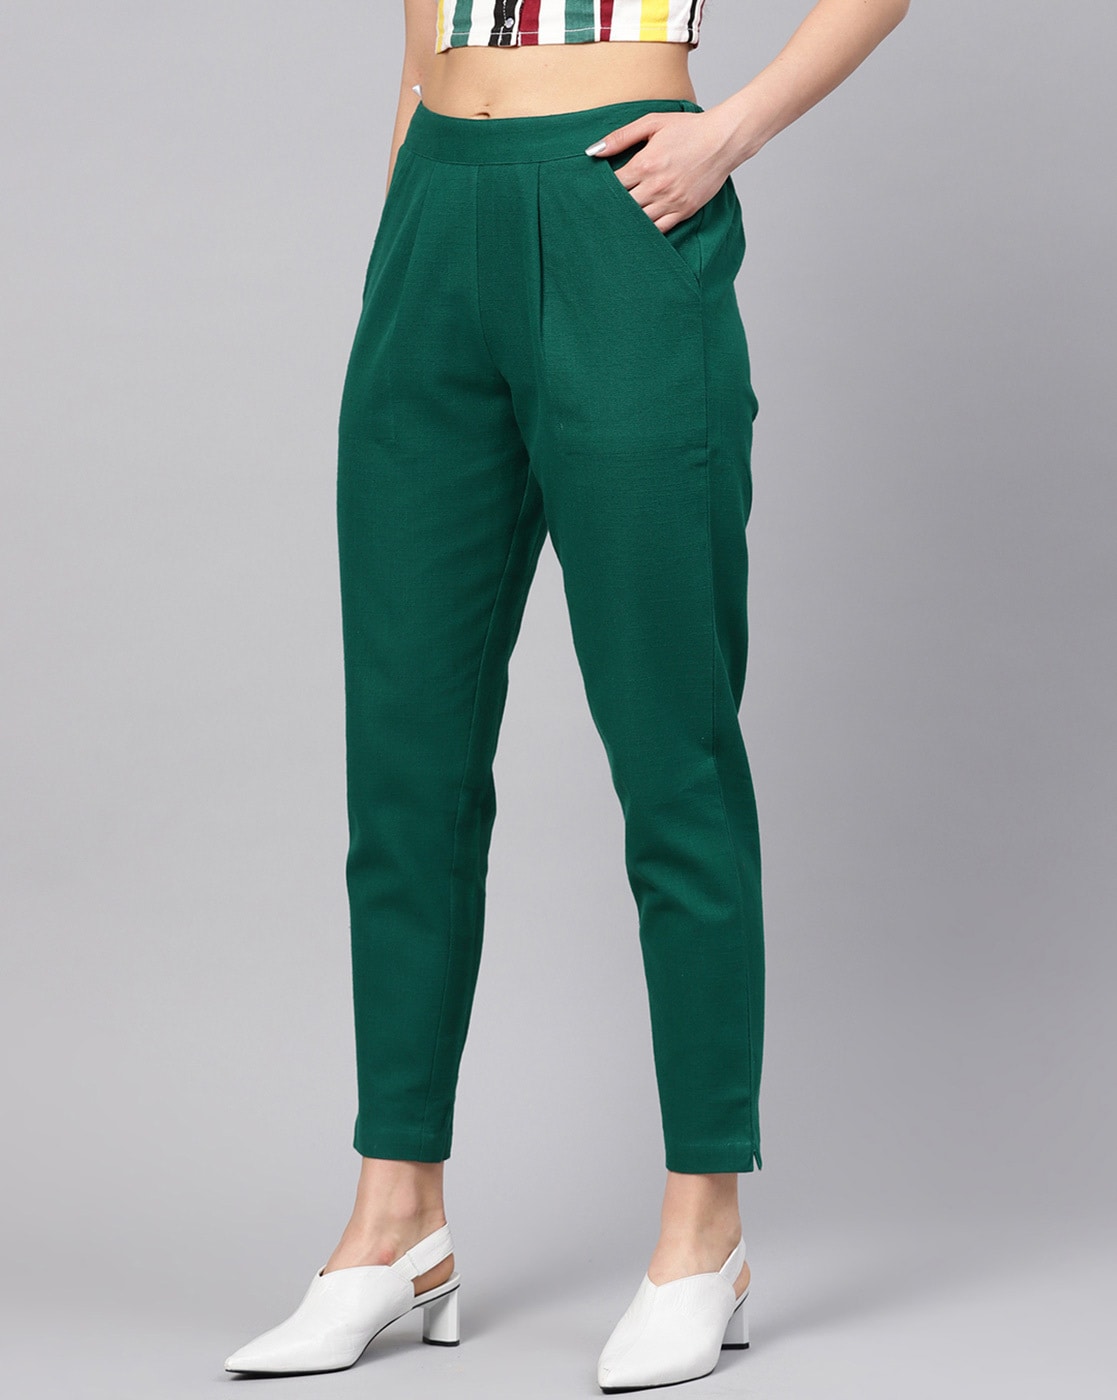 Green Color Ladies Pant Style Suit at Rs 530, New Items in Jaipur